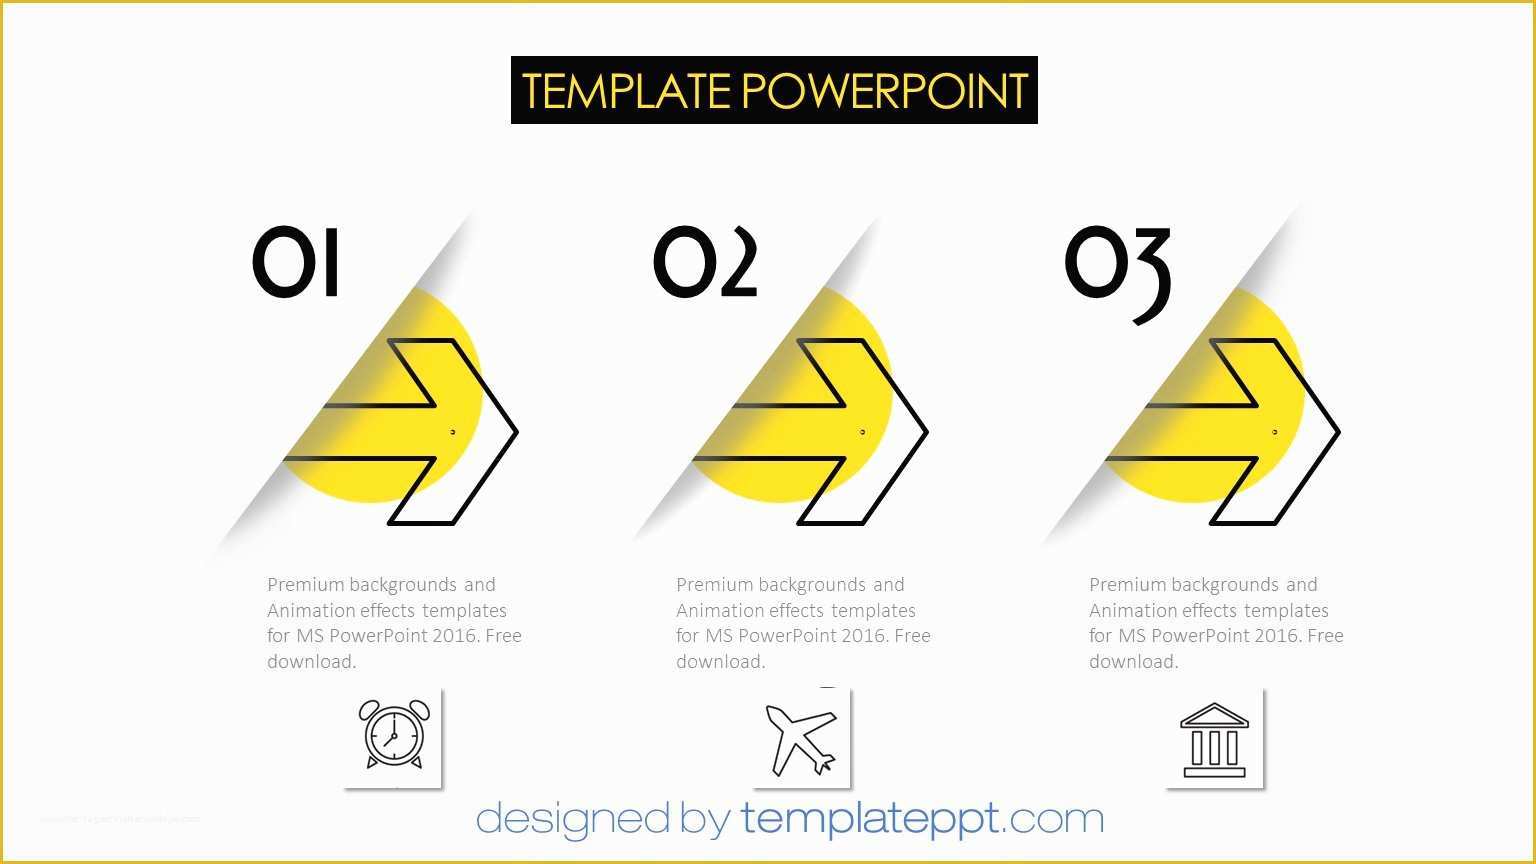 Best Animated Ppt Templates Free Download Of Free Download Template Powerpoint Exclusive Best Animated